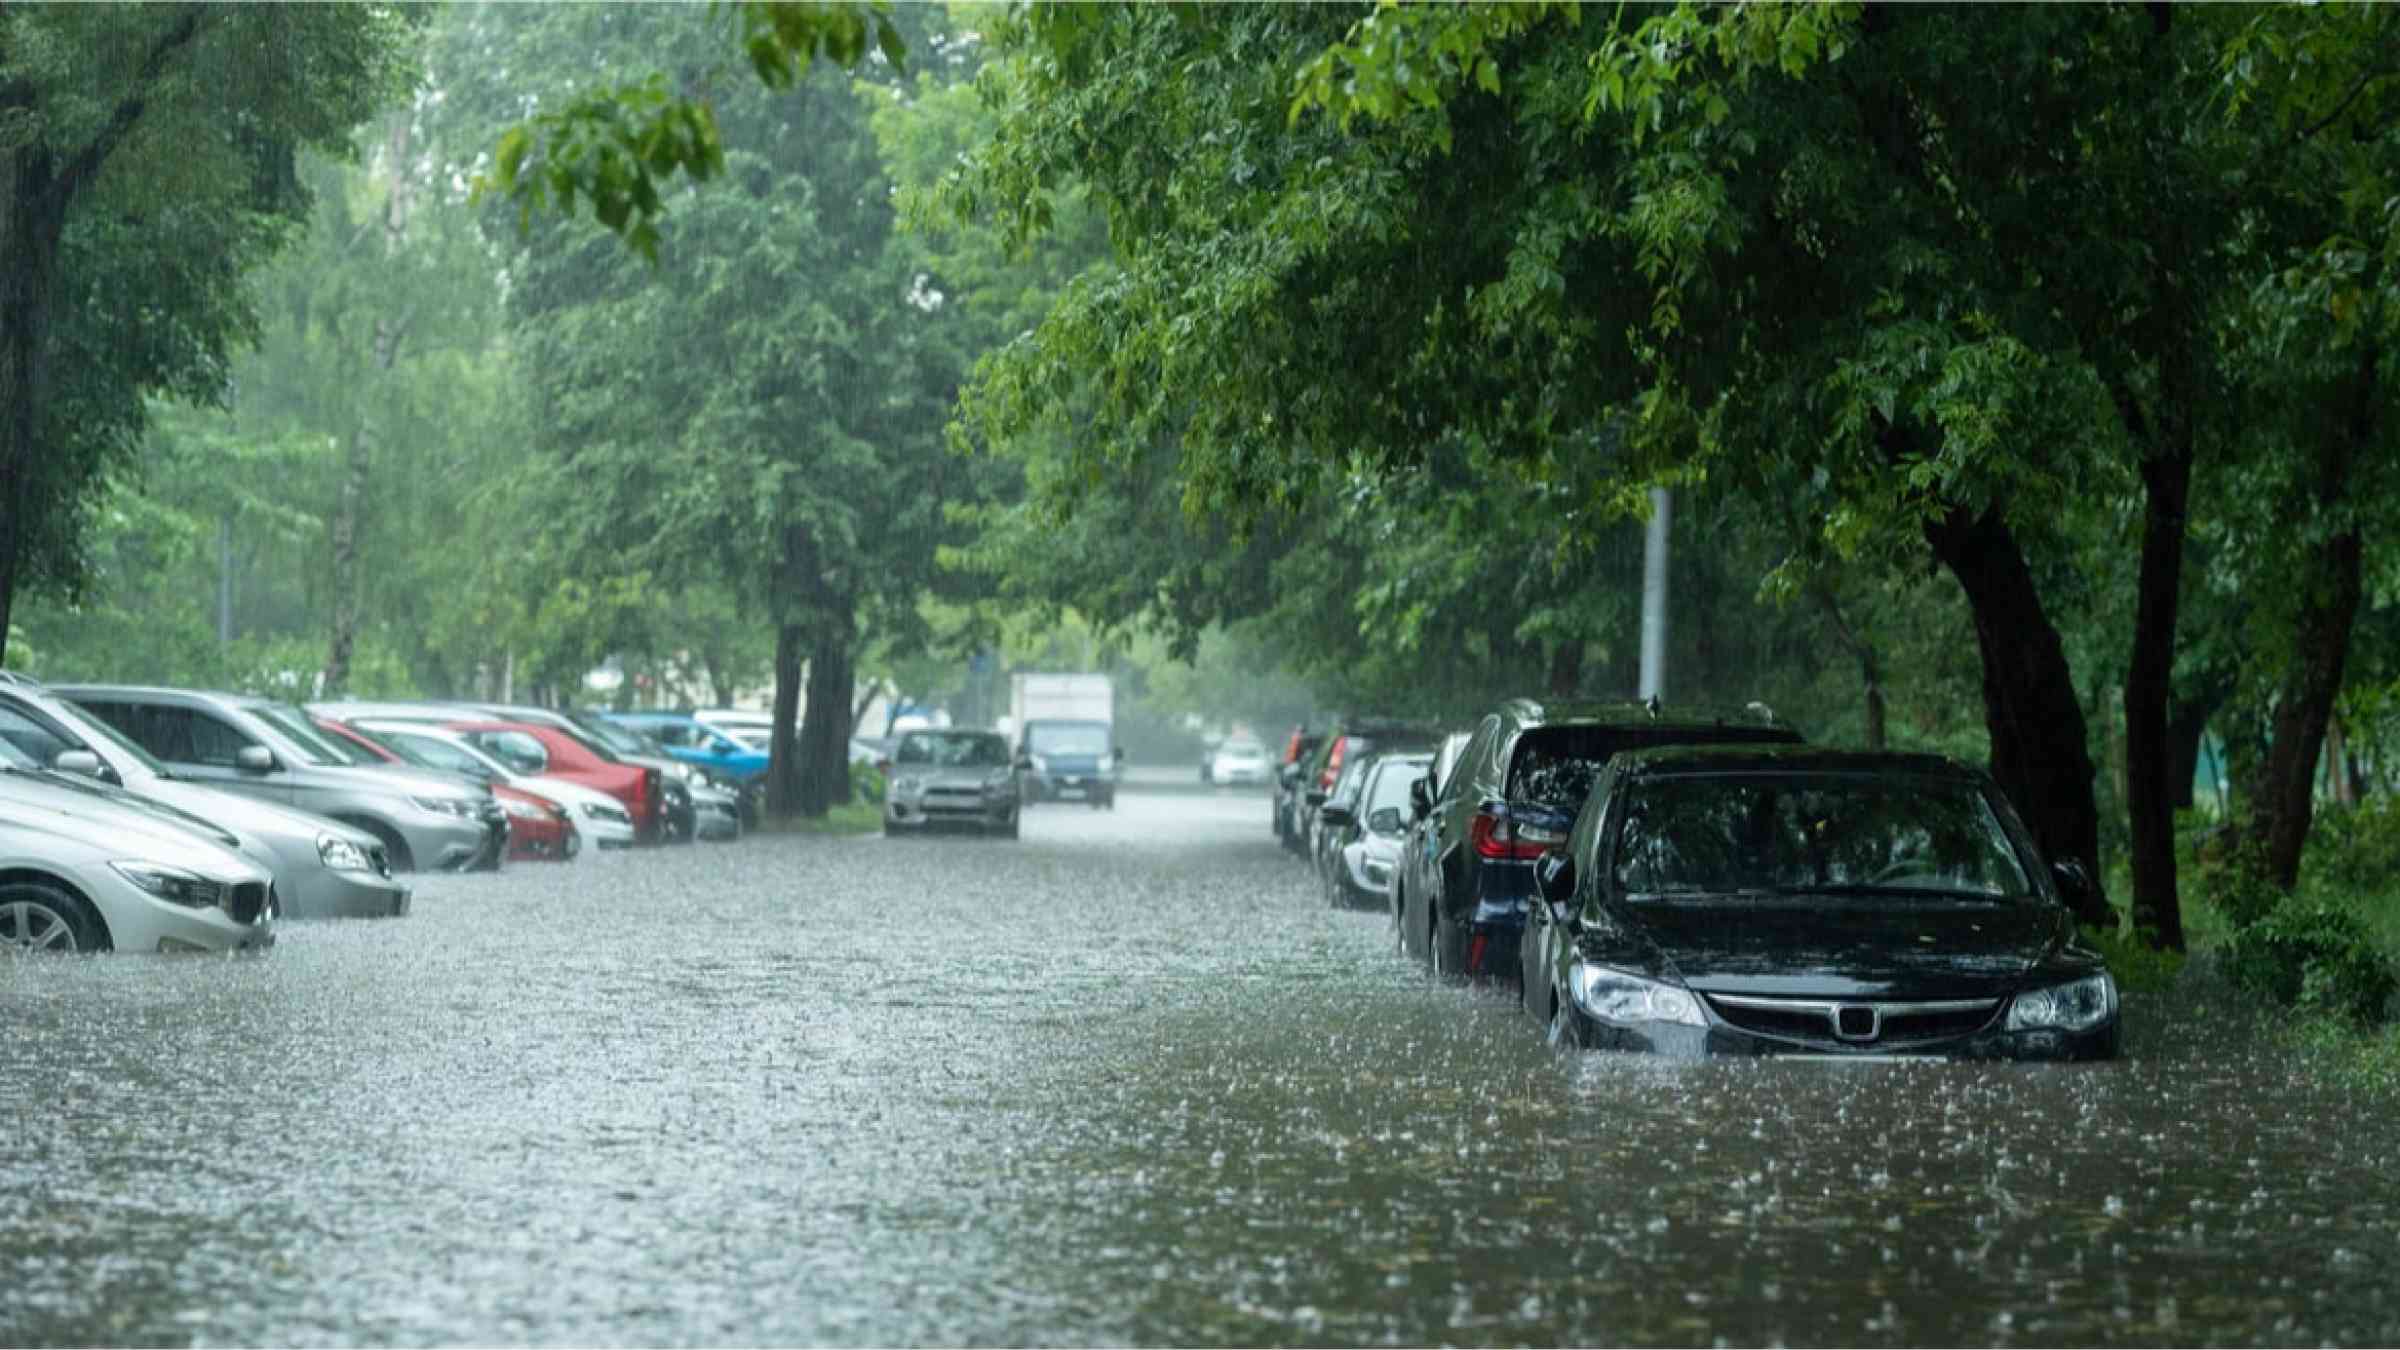 Cars in a flooded city street